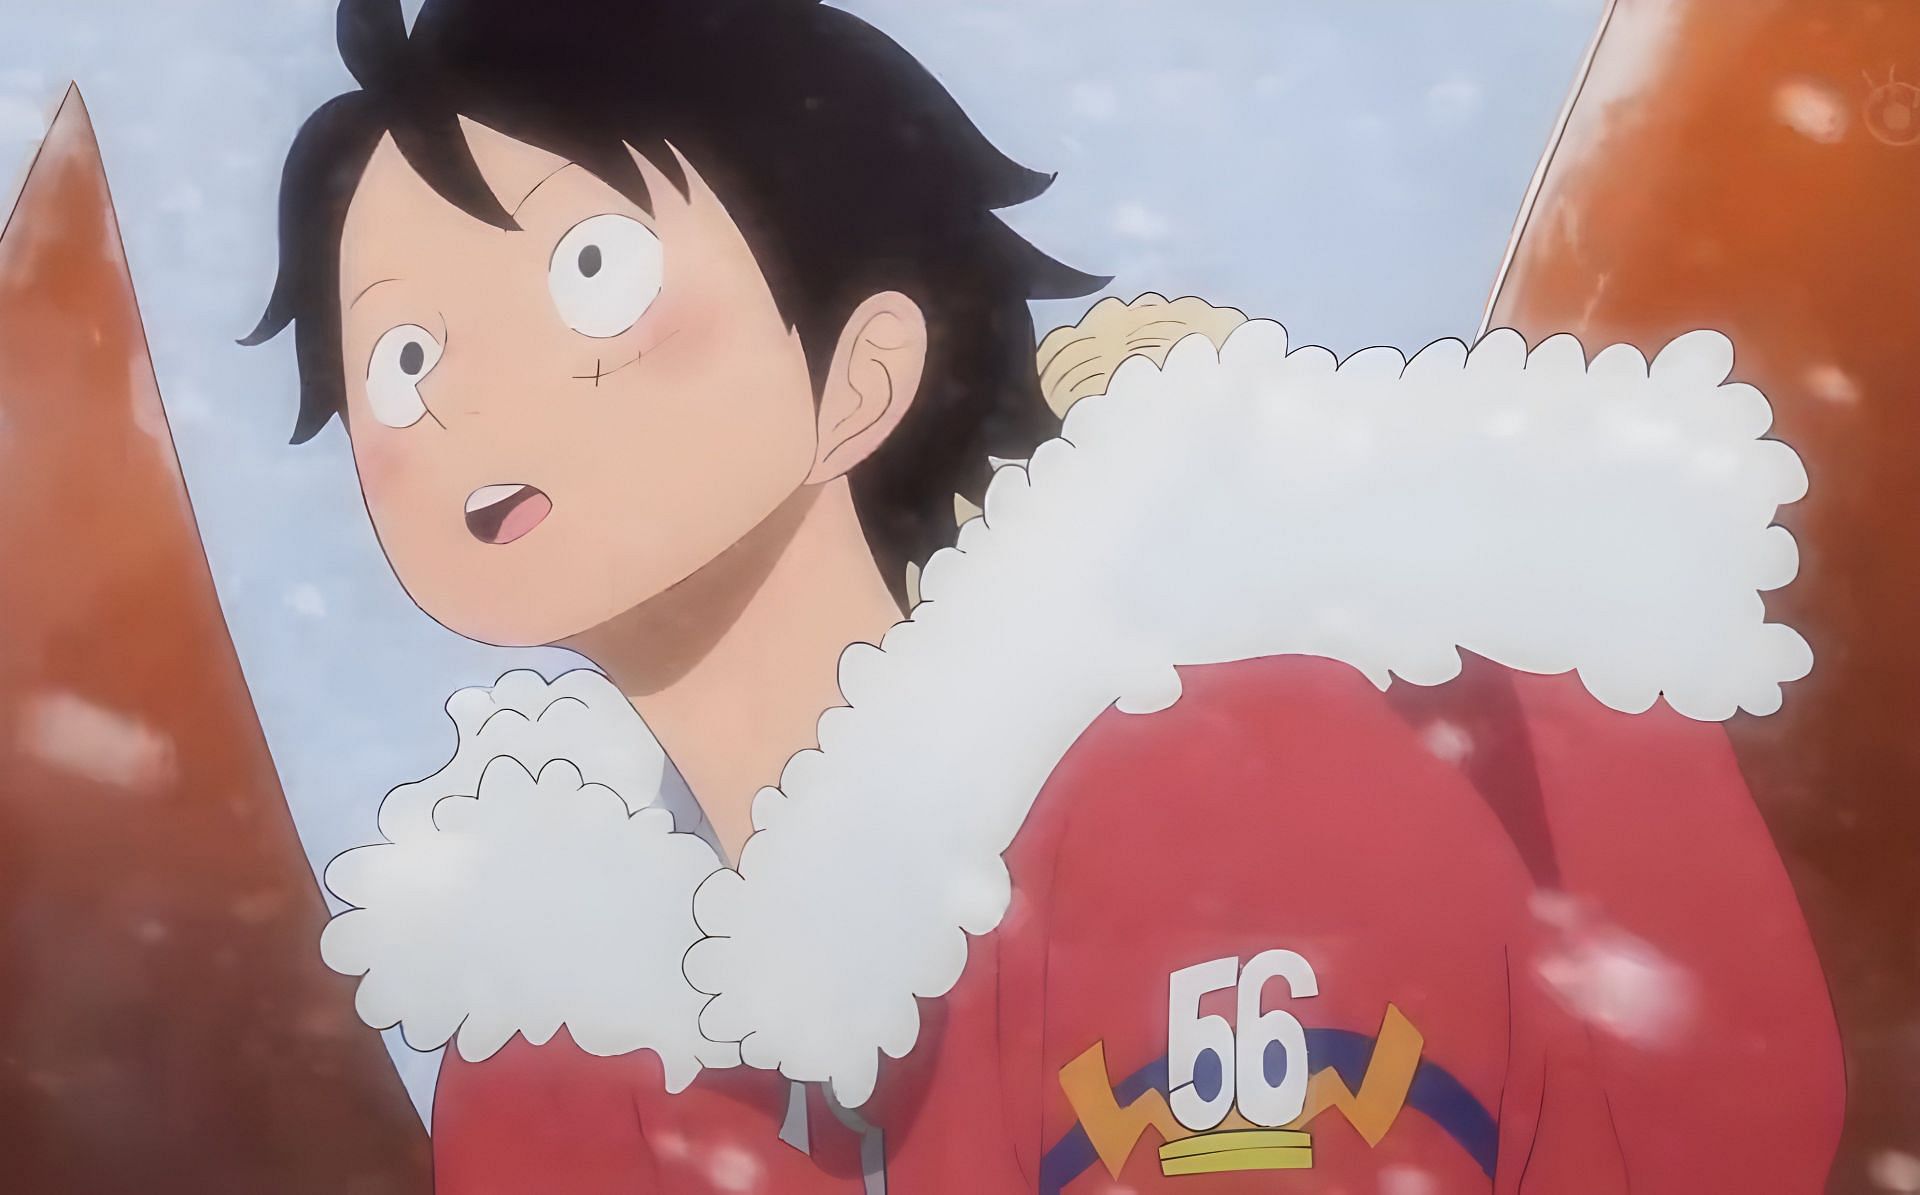 Luffy as seen in One Piece (Image via Toei Animation)